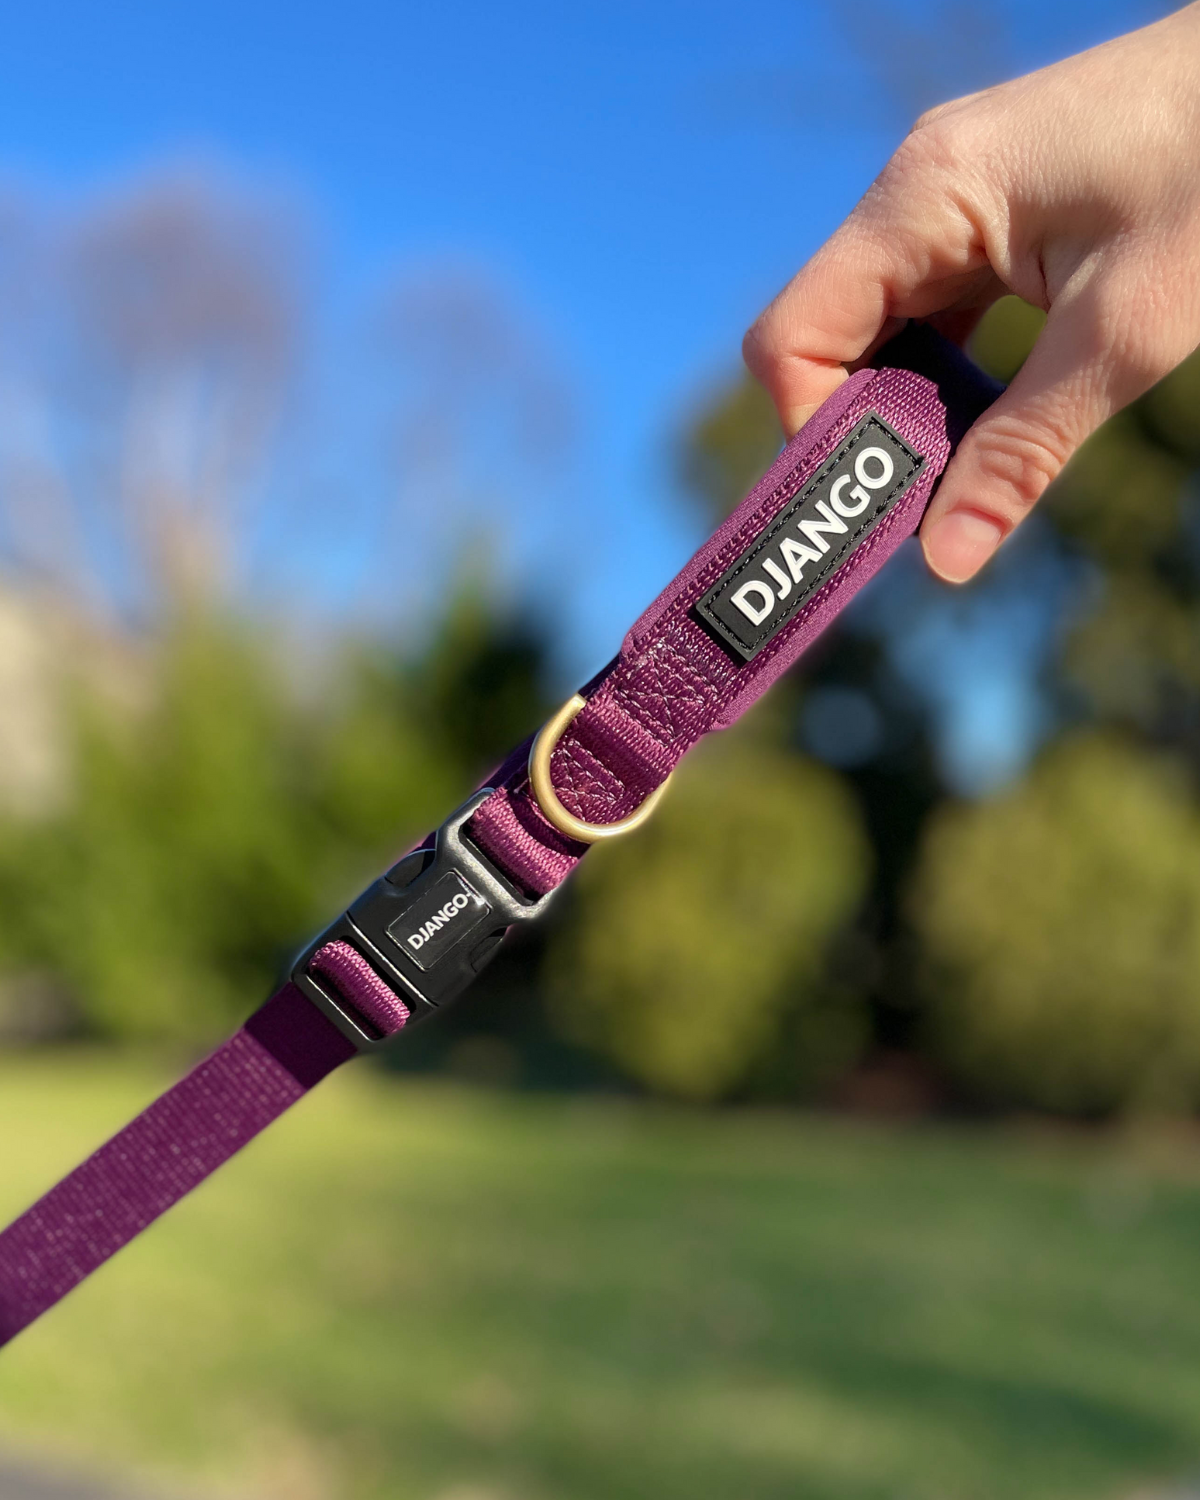 DJANGO’s Adjustable Hands-Free Adventure Dog Leash is a versatile leash that can be used as a 6.5 foot hand-held leash and an around-the-waist “hands-free” leash. The durable and stylish dog leash can also be used for temporary tie-ups (i.e. around your chair or table leg when you are out to lunch) and perfectly compliments your pup's favorite DJANGO Adventure Collection dog harness and collar set.